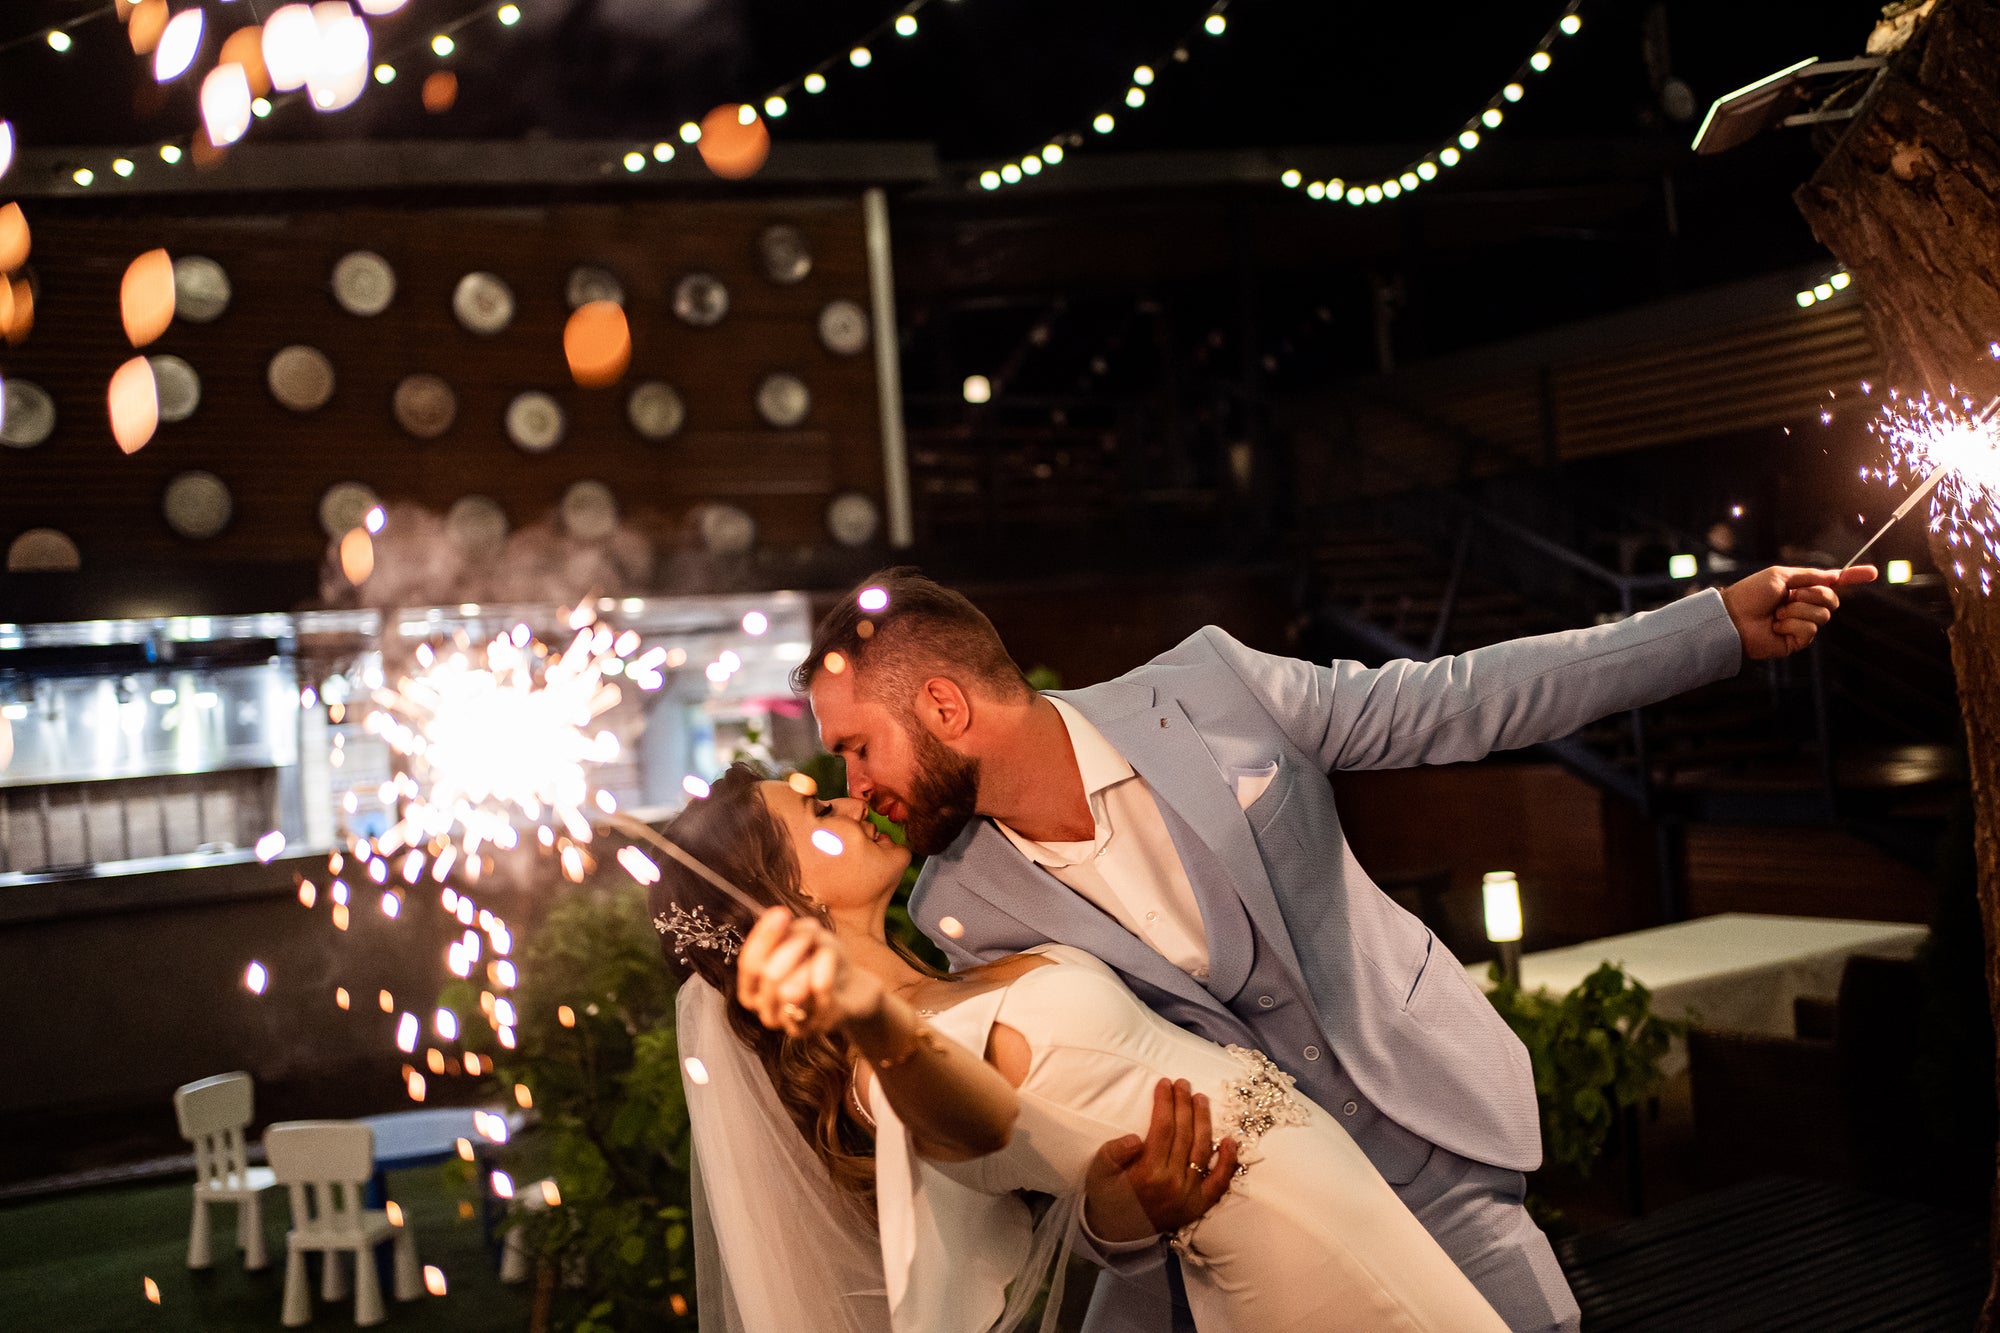 Extra long wedding sparklers being used at wedding send off